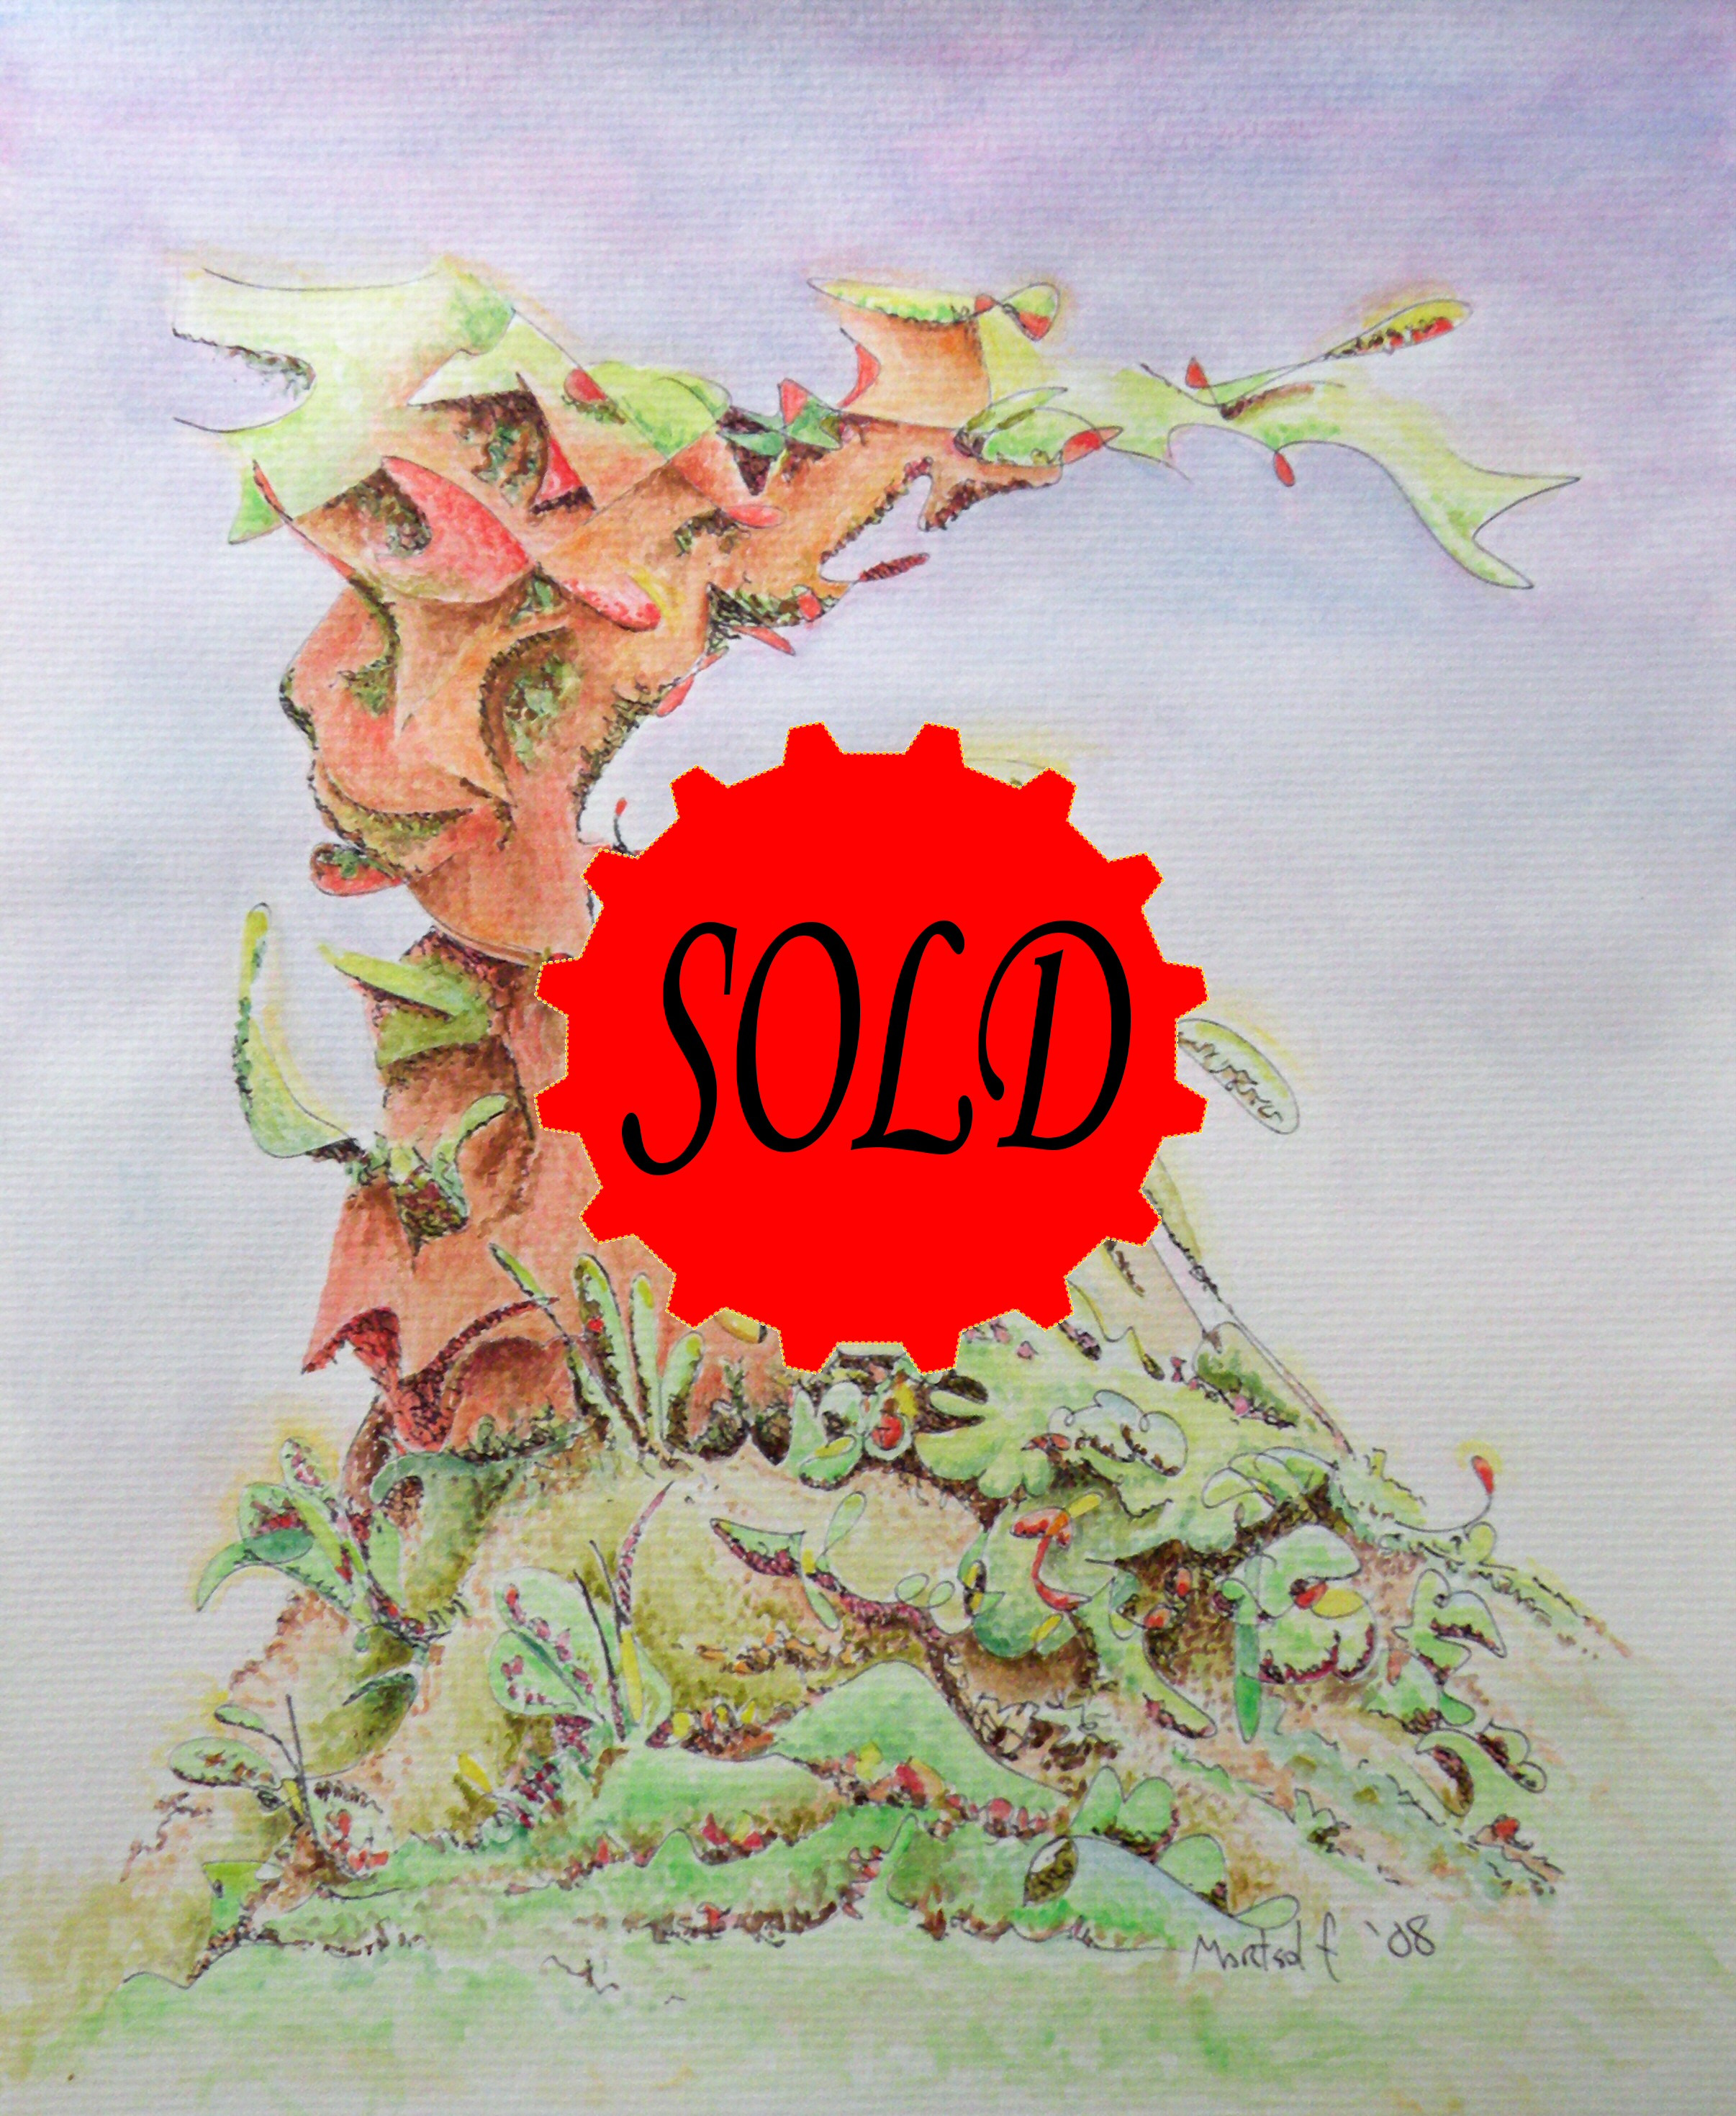 Sold mountainside npgqpy